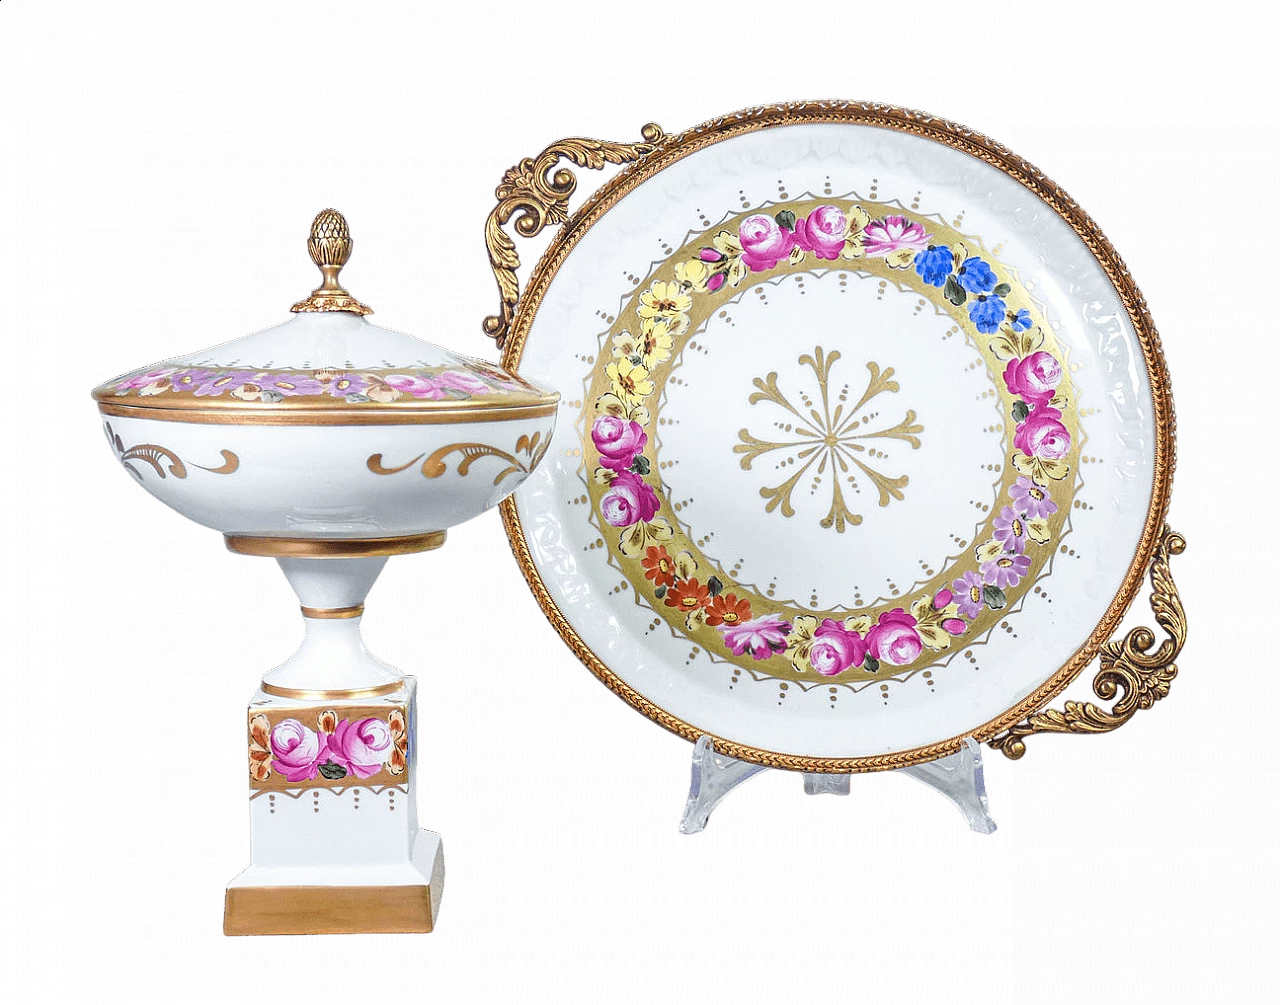 Hand-painted Limoges porcelain serving tray and riser 11